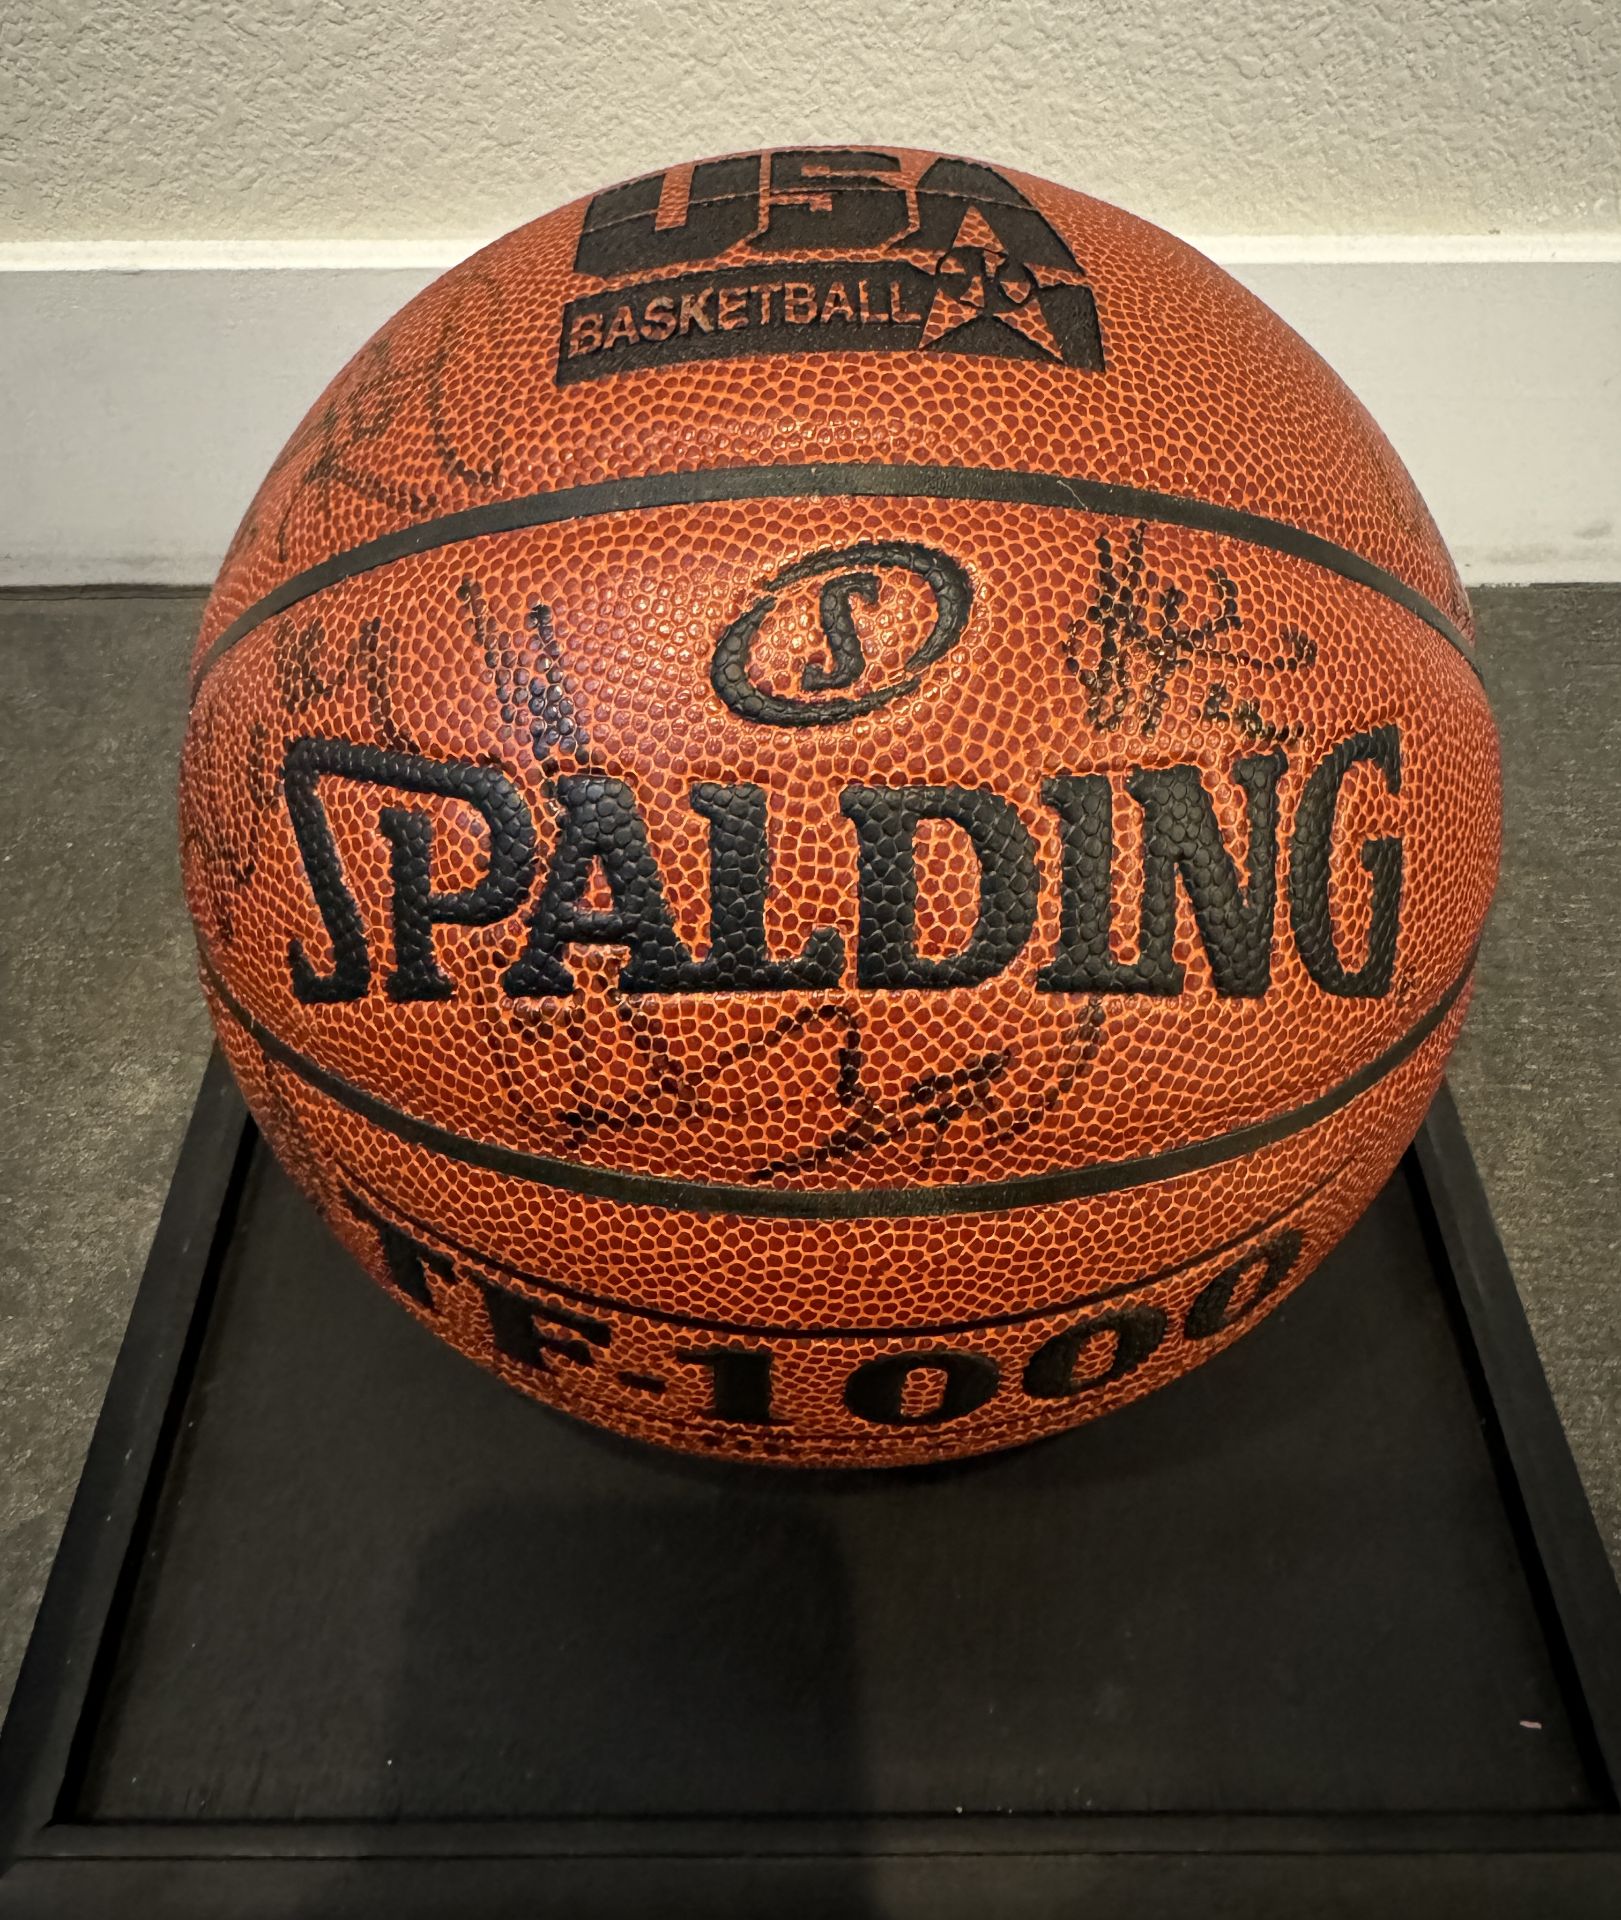 BASKETBALL SIGNED POSSIBLY BY 2012 DREAM TEAM, MISSING MICHAEL JORDAN - Image 3 of 4